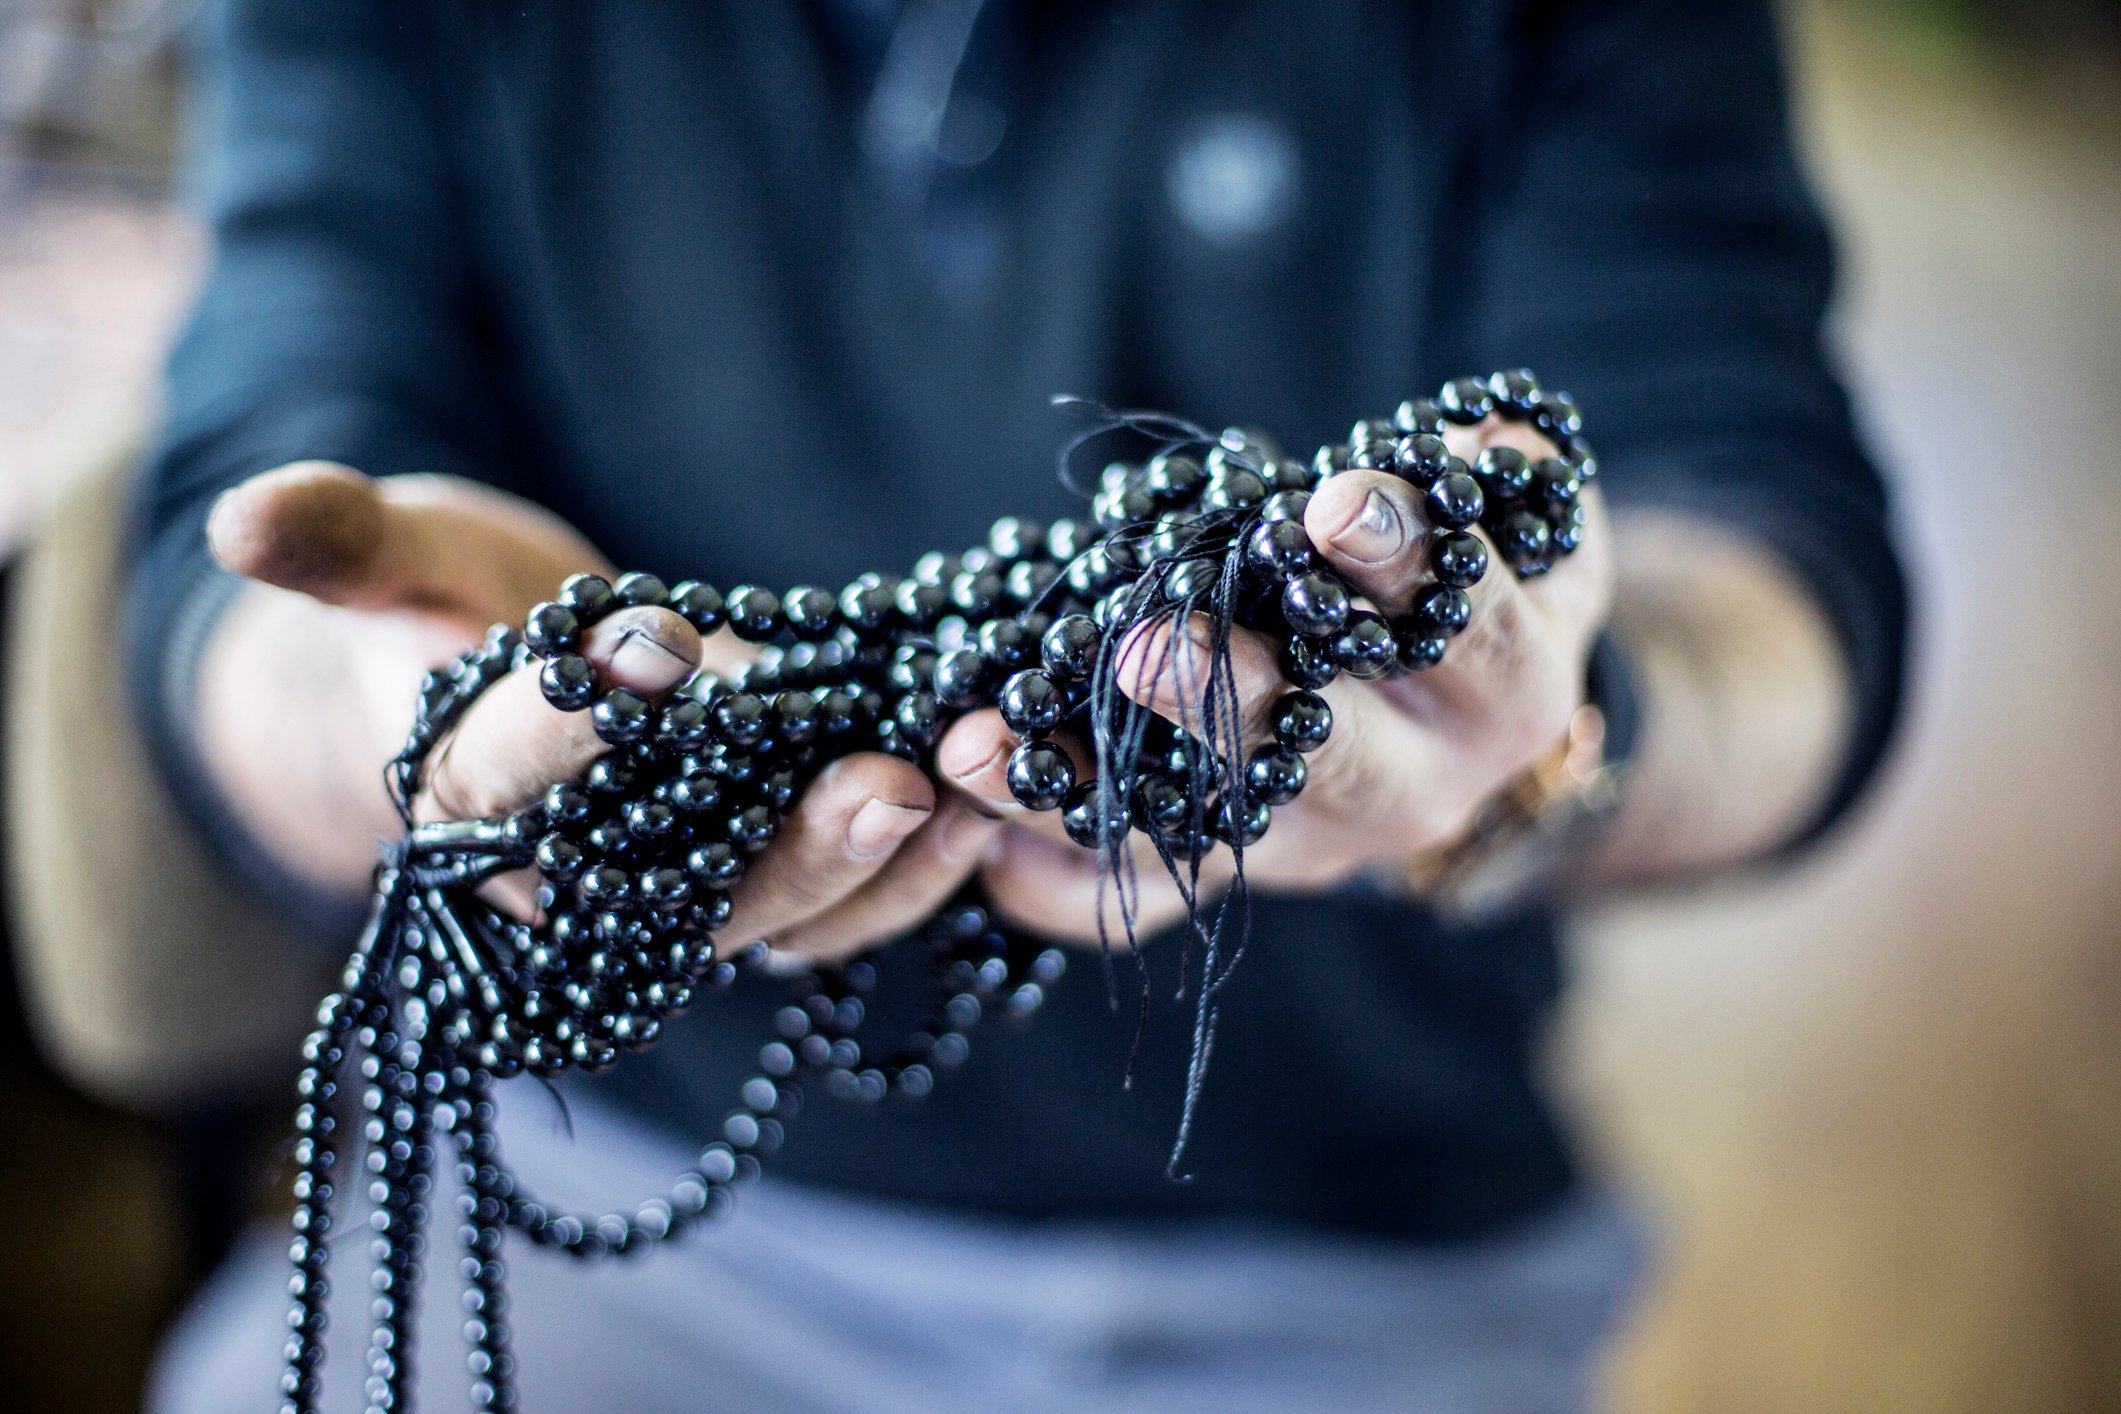 Oltu stones have been used as an important material in the production of quality prayer beads since the 18th century. (iStock Photo)